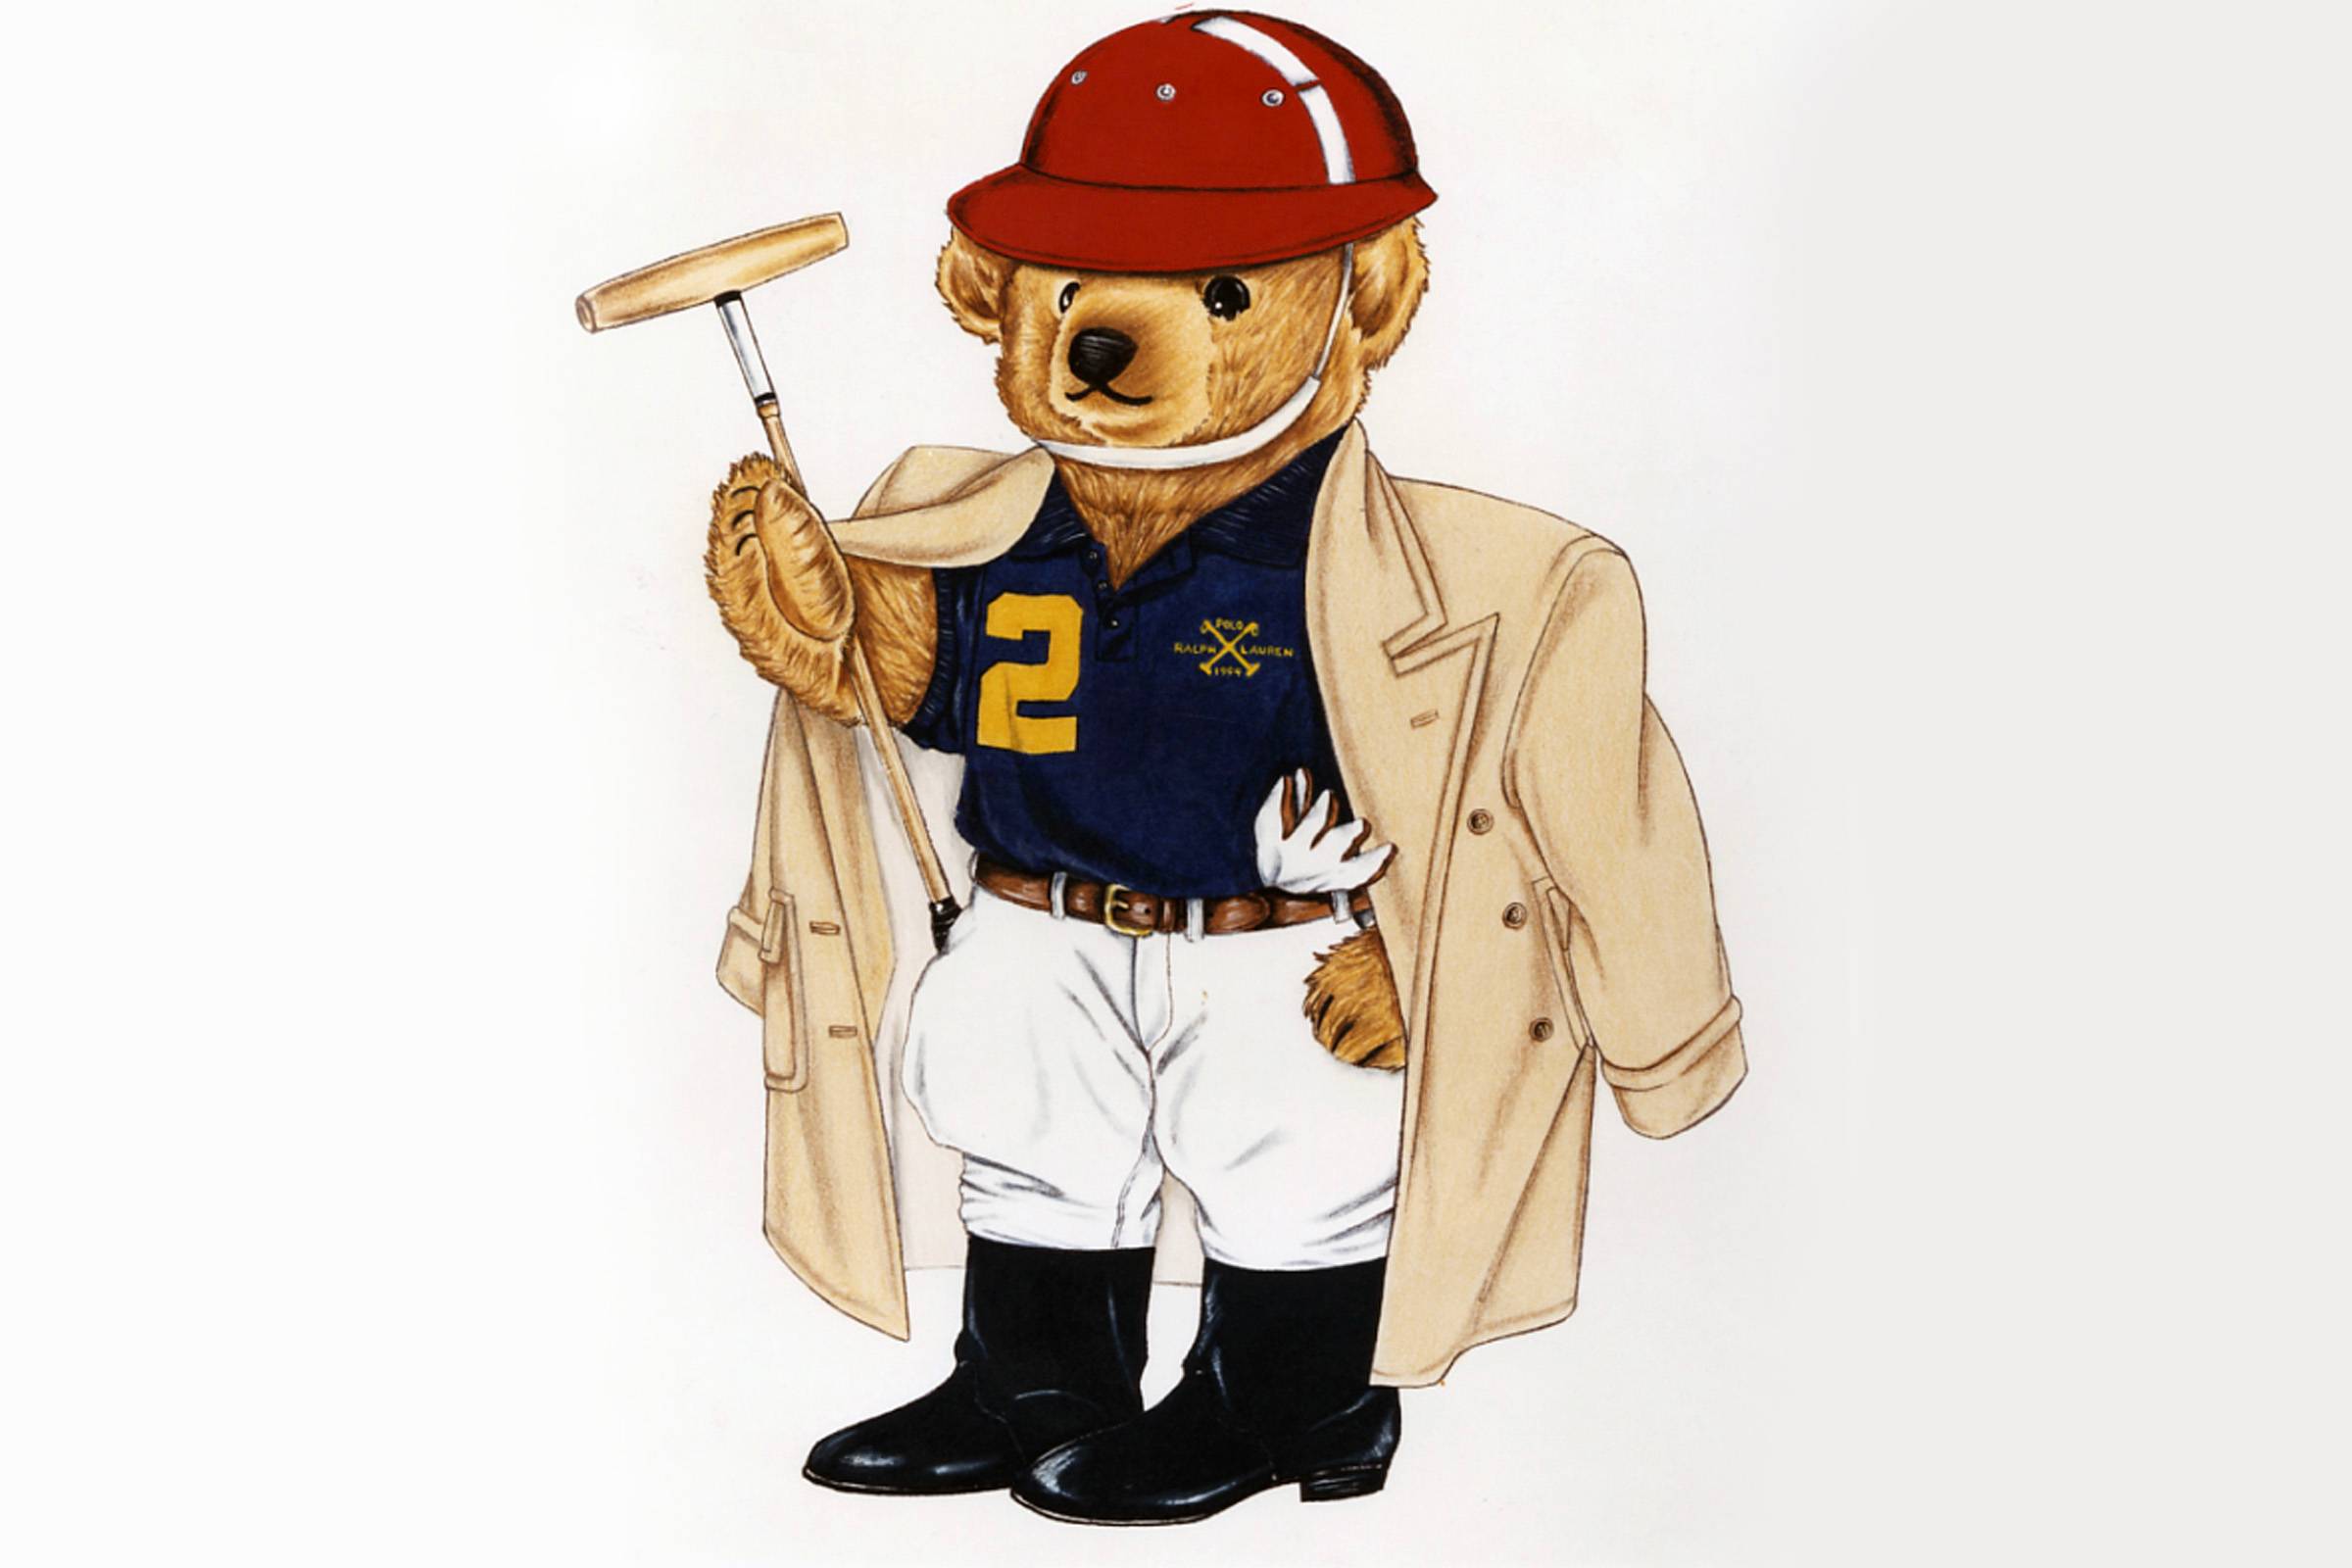 The history behind the iconic Ralph Lauren's Polo Bear